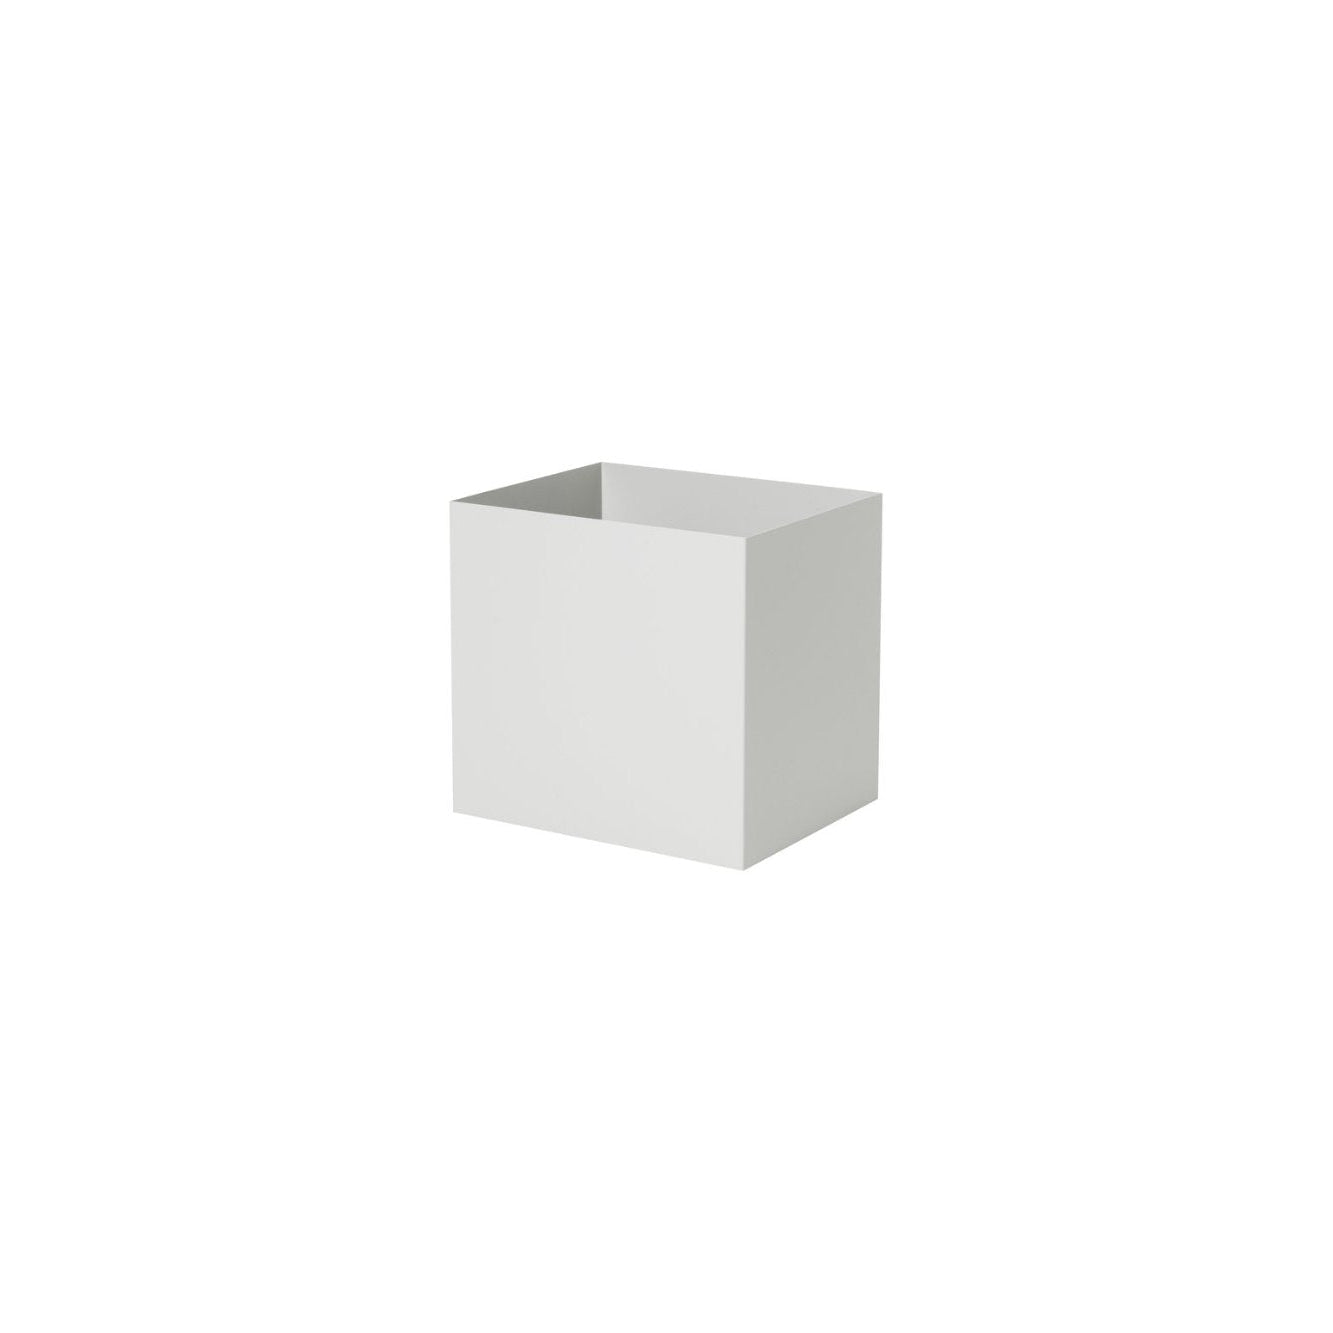 Ferm Living Plant Box Container, Gray